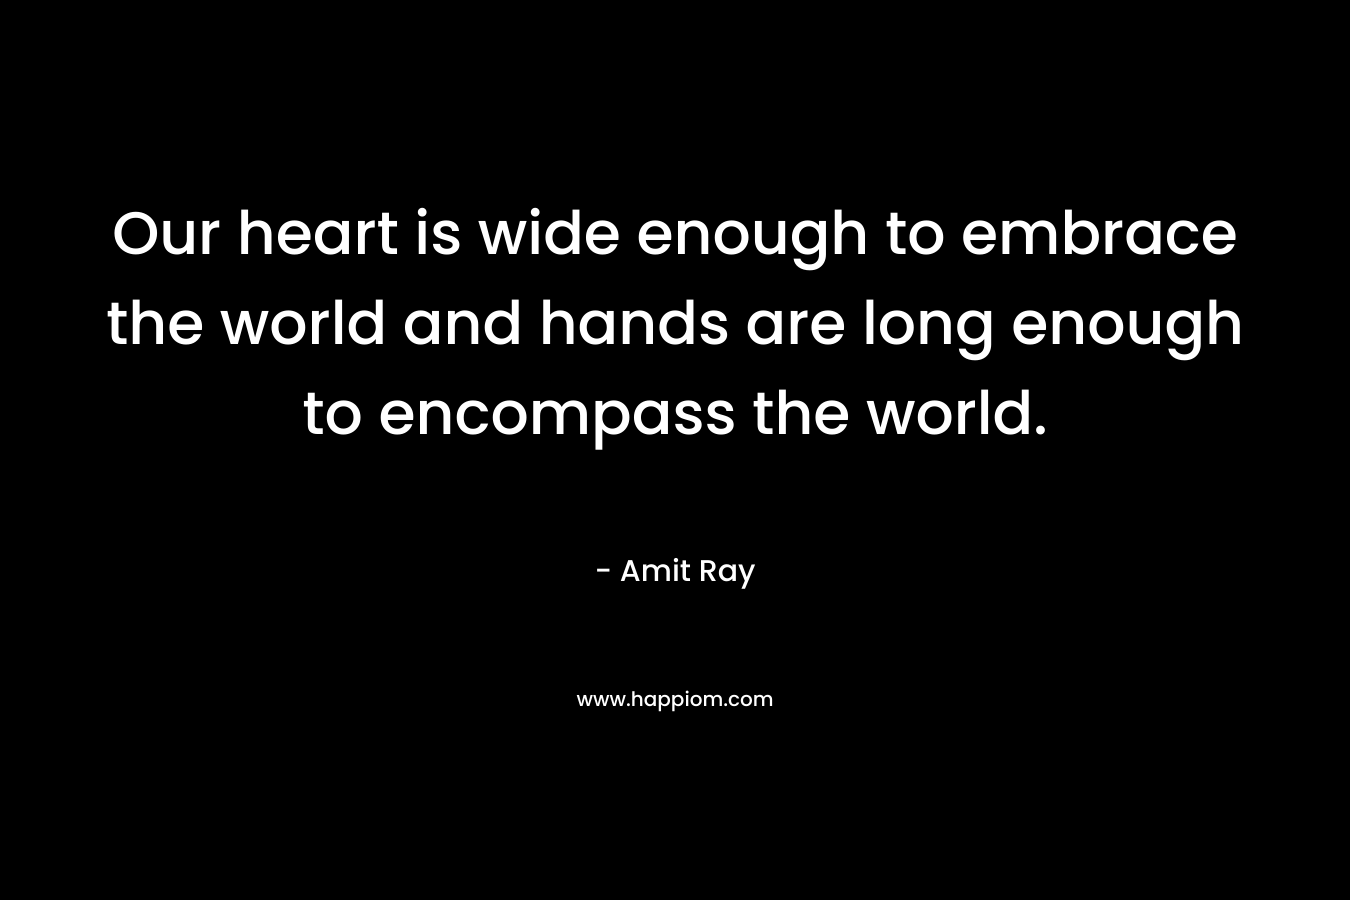 Our heart is wide enough to embrace the world and hands are long enough to encompass the world.